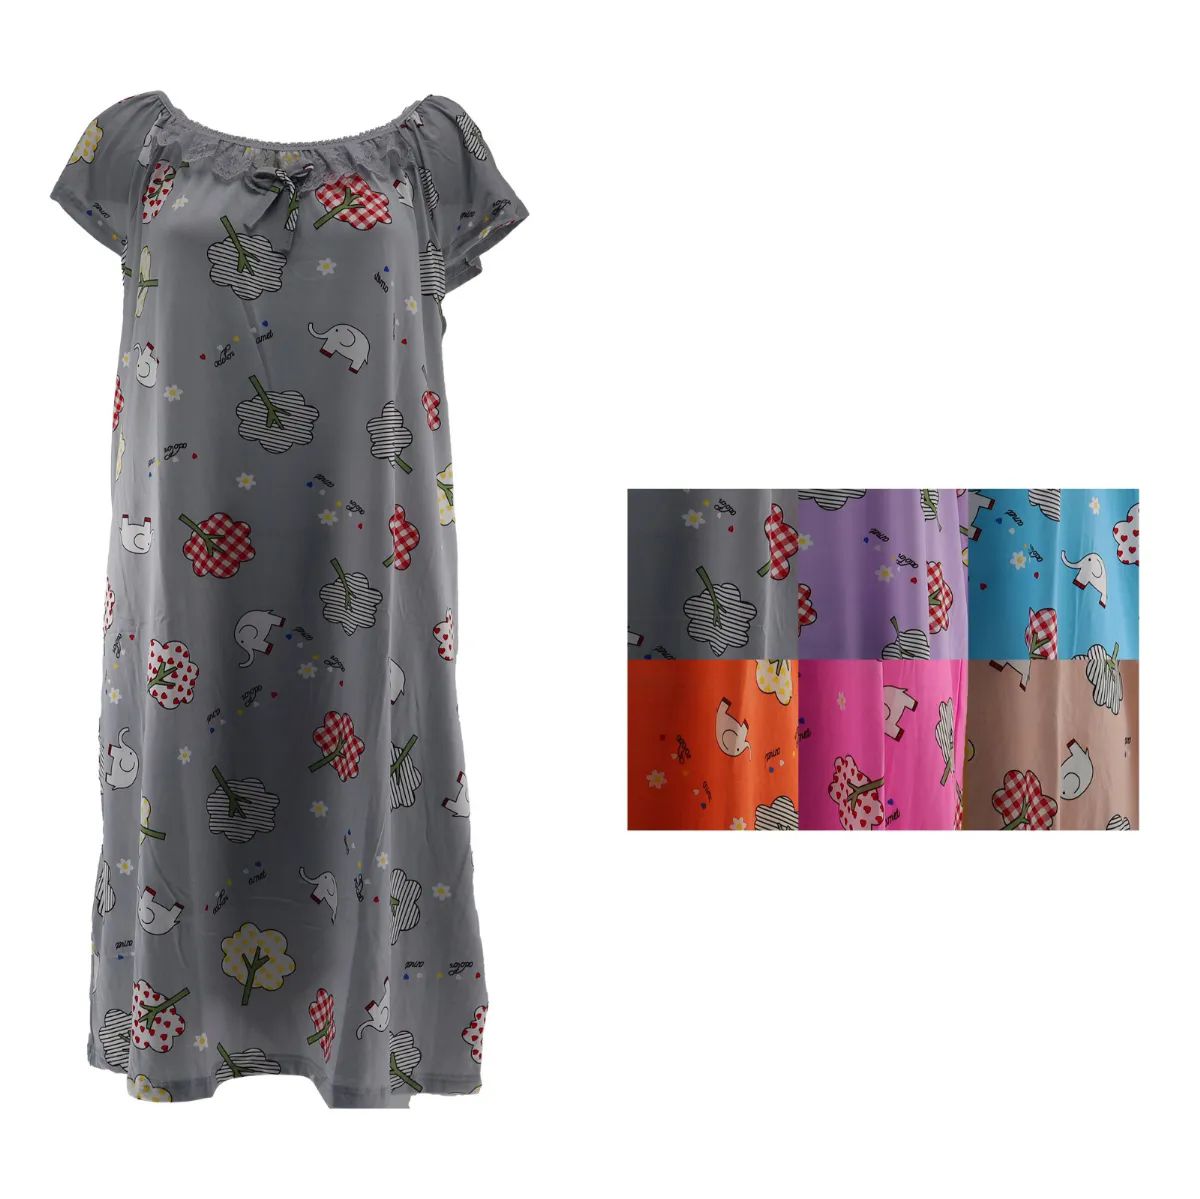 96 Pieces of Woman Elephant Print Night Gown